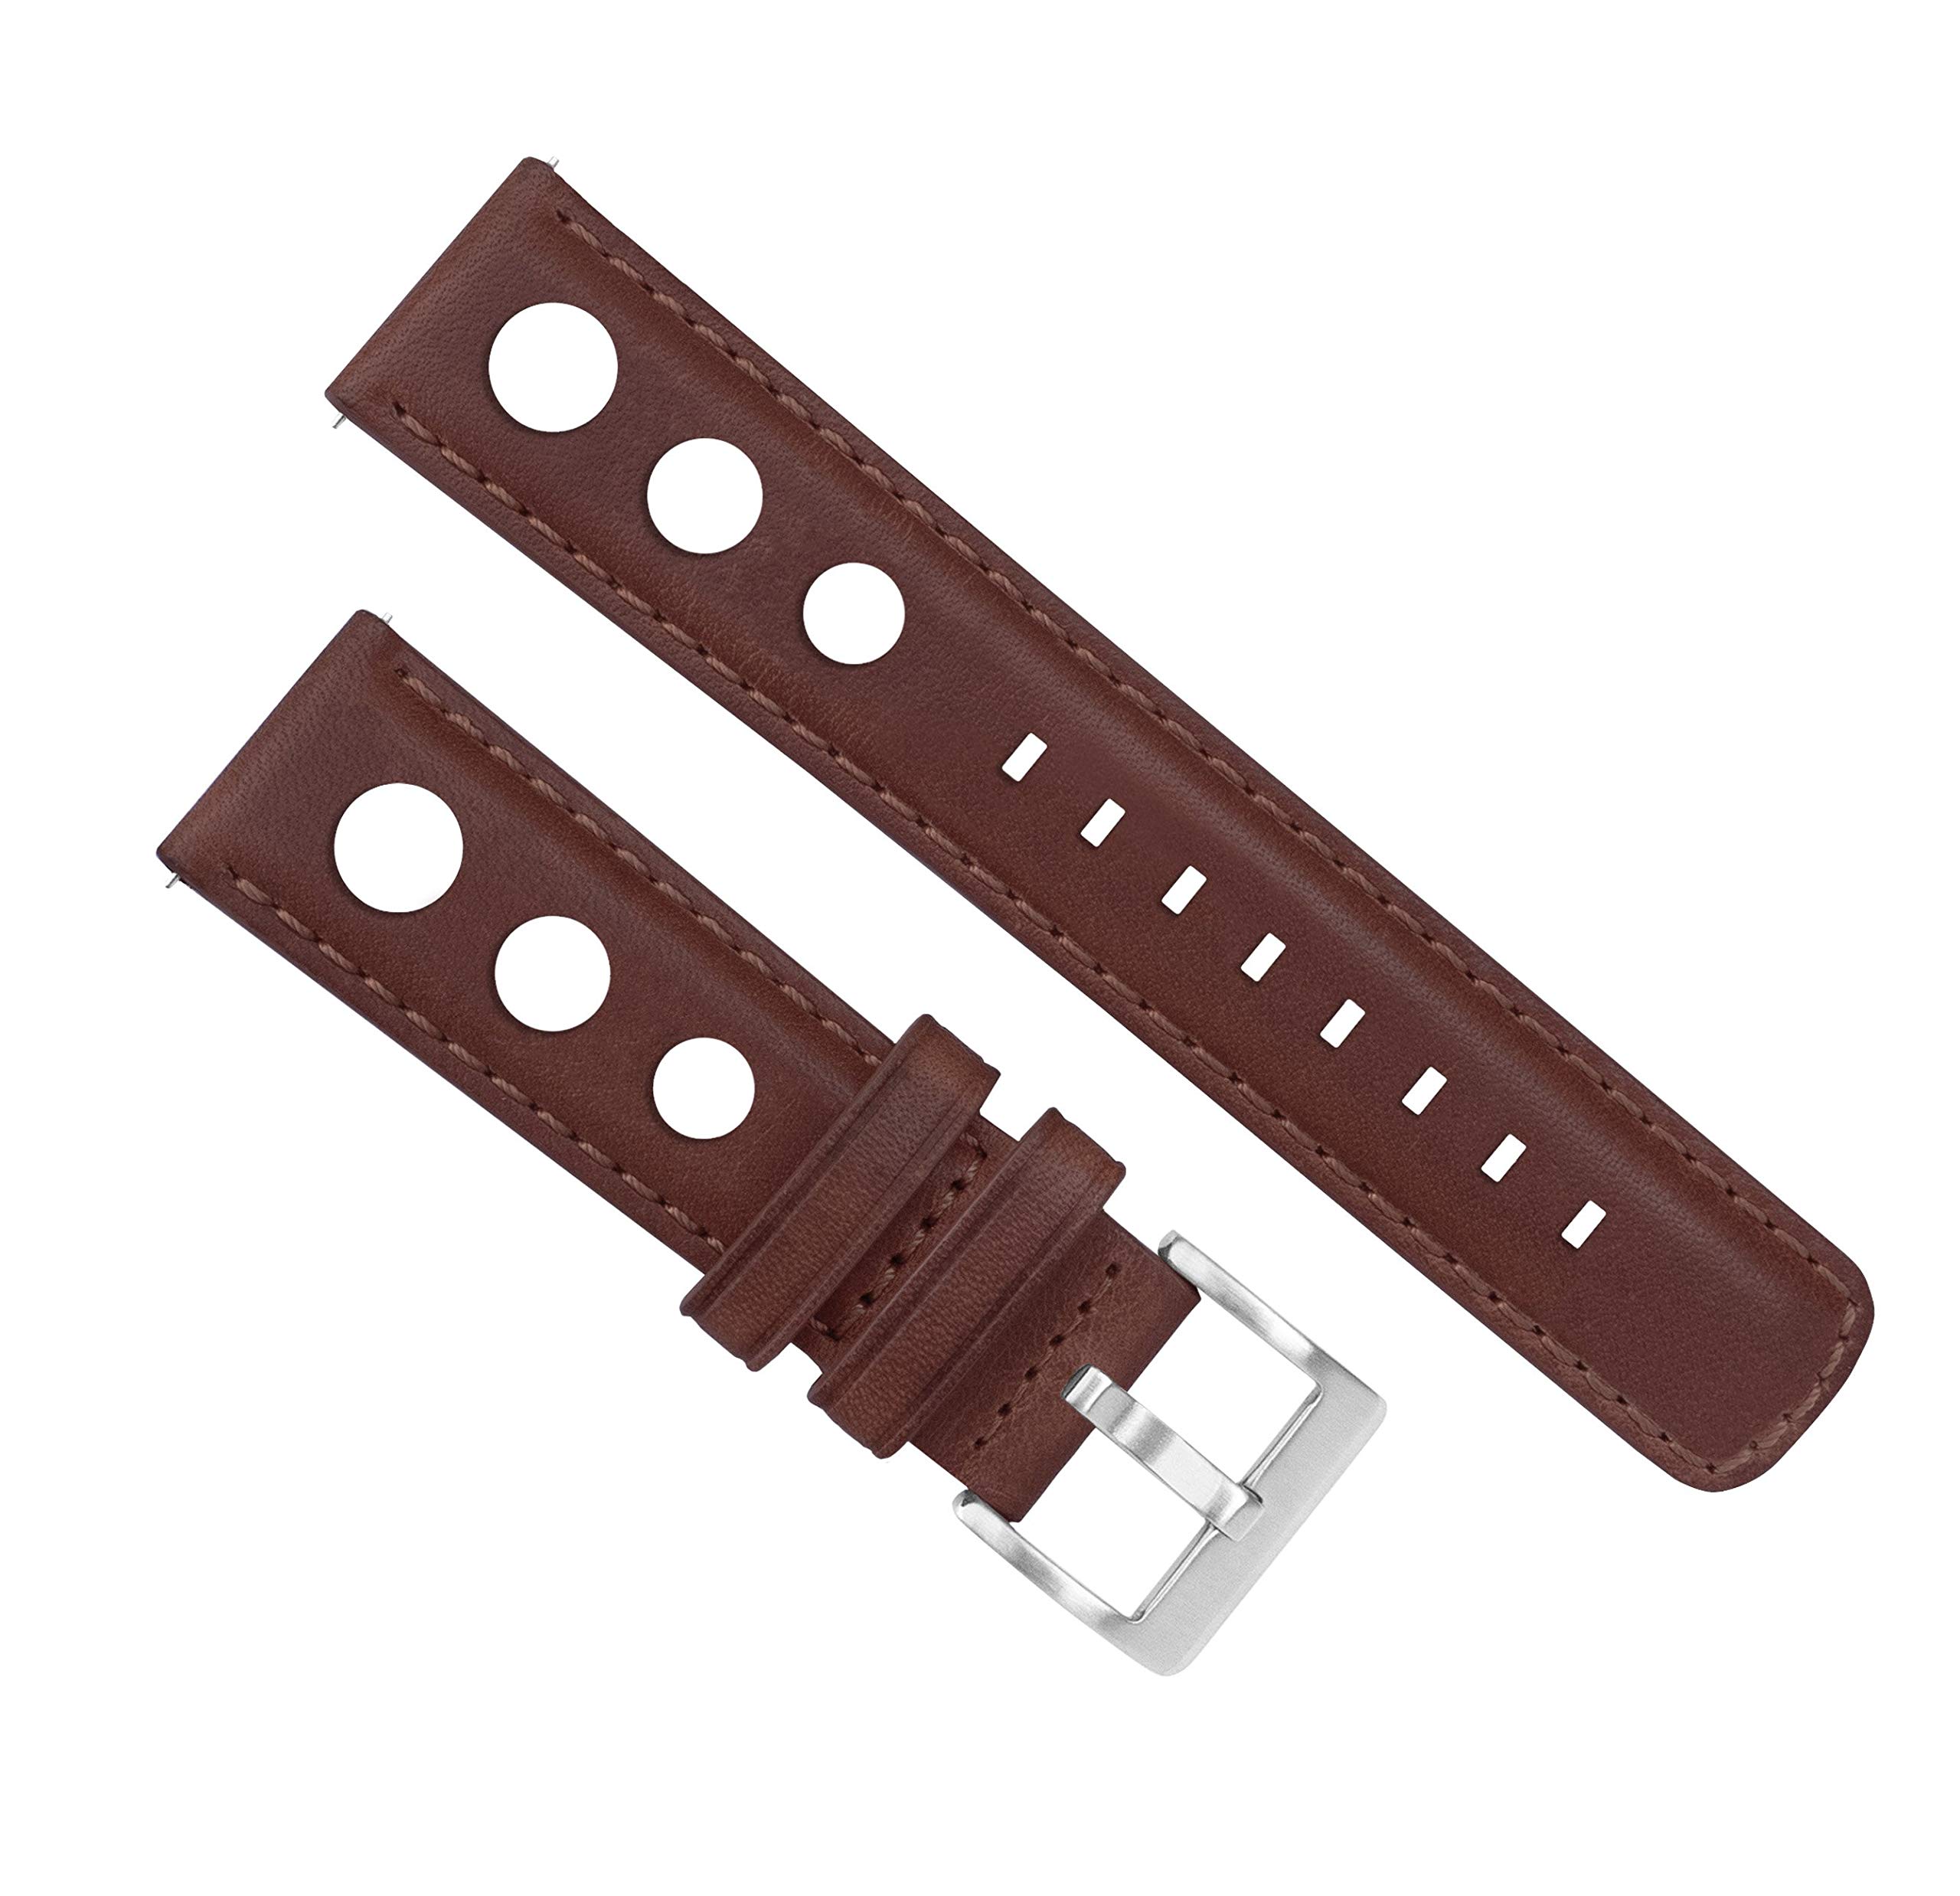 Barton Racing & Rally Horween Leather Straps with Integrated Quick Release Spring Bars - Standard Length fits Wrists 5